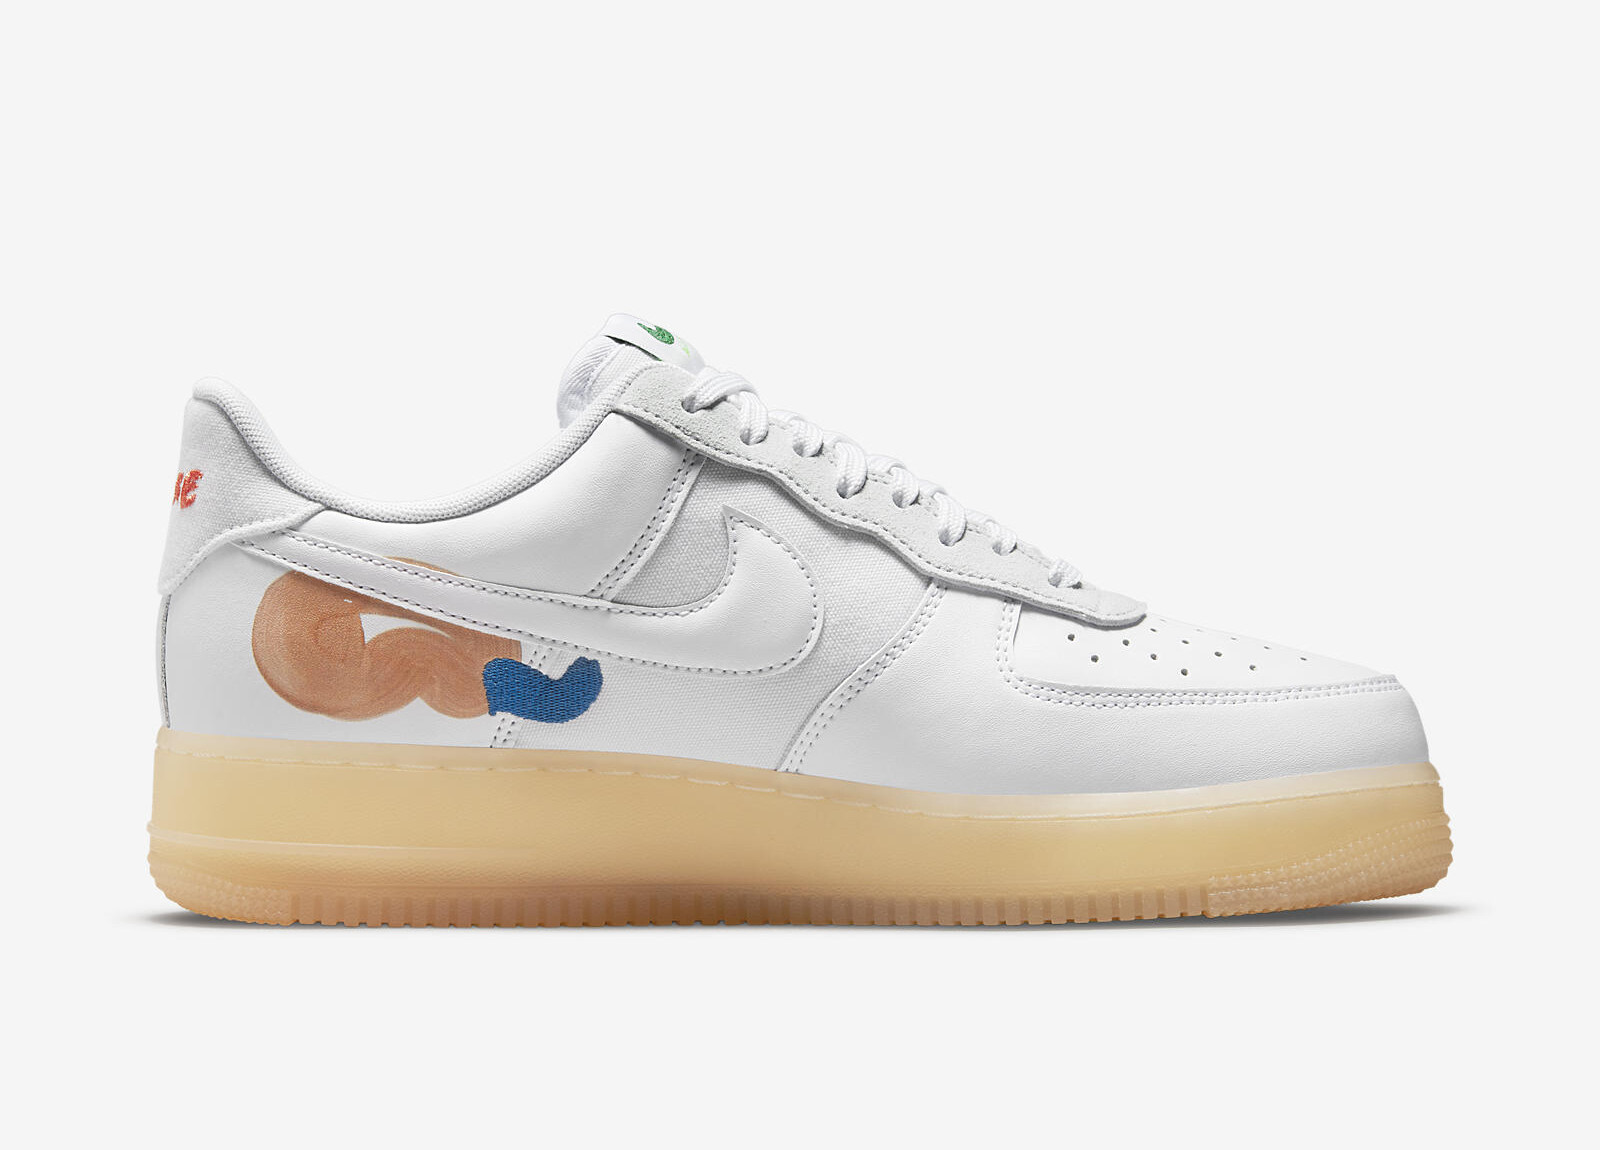 Nike Air Force 1
« Flyleather »